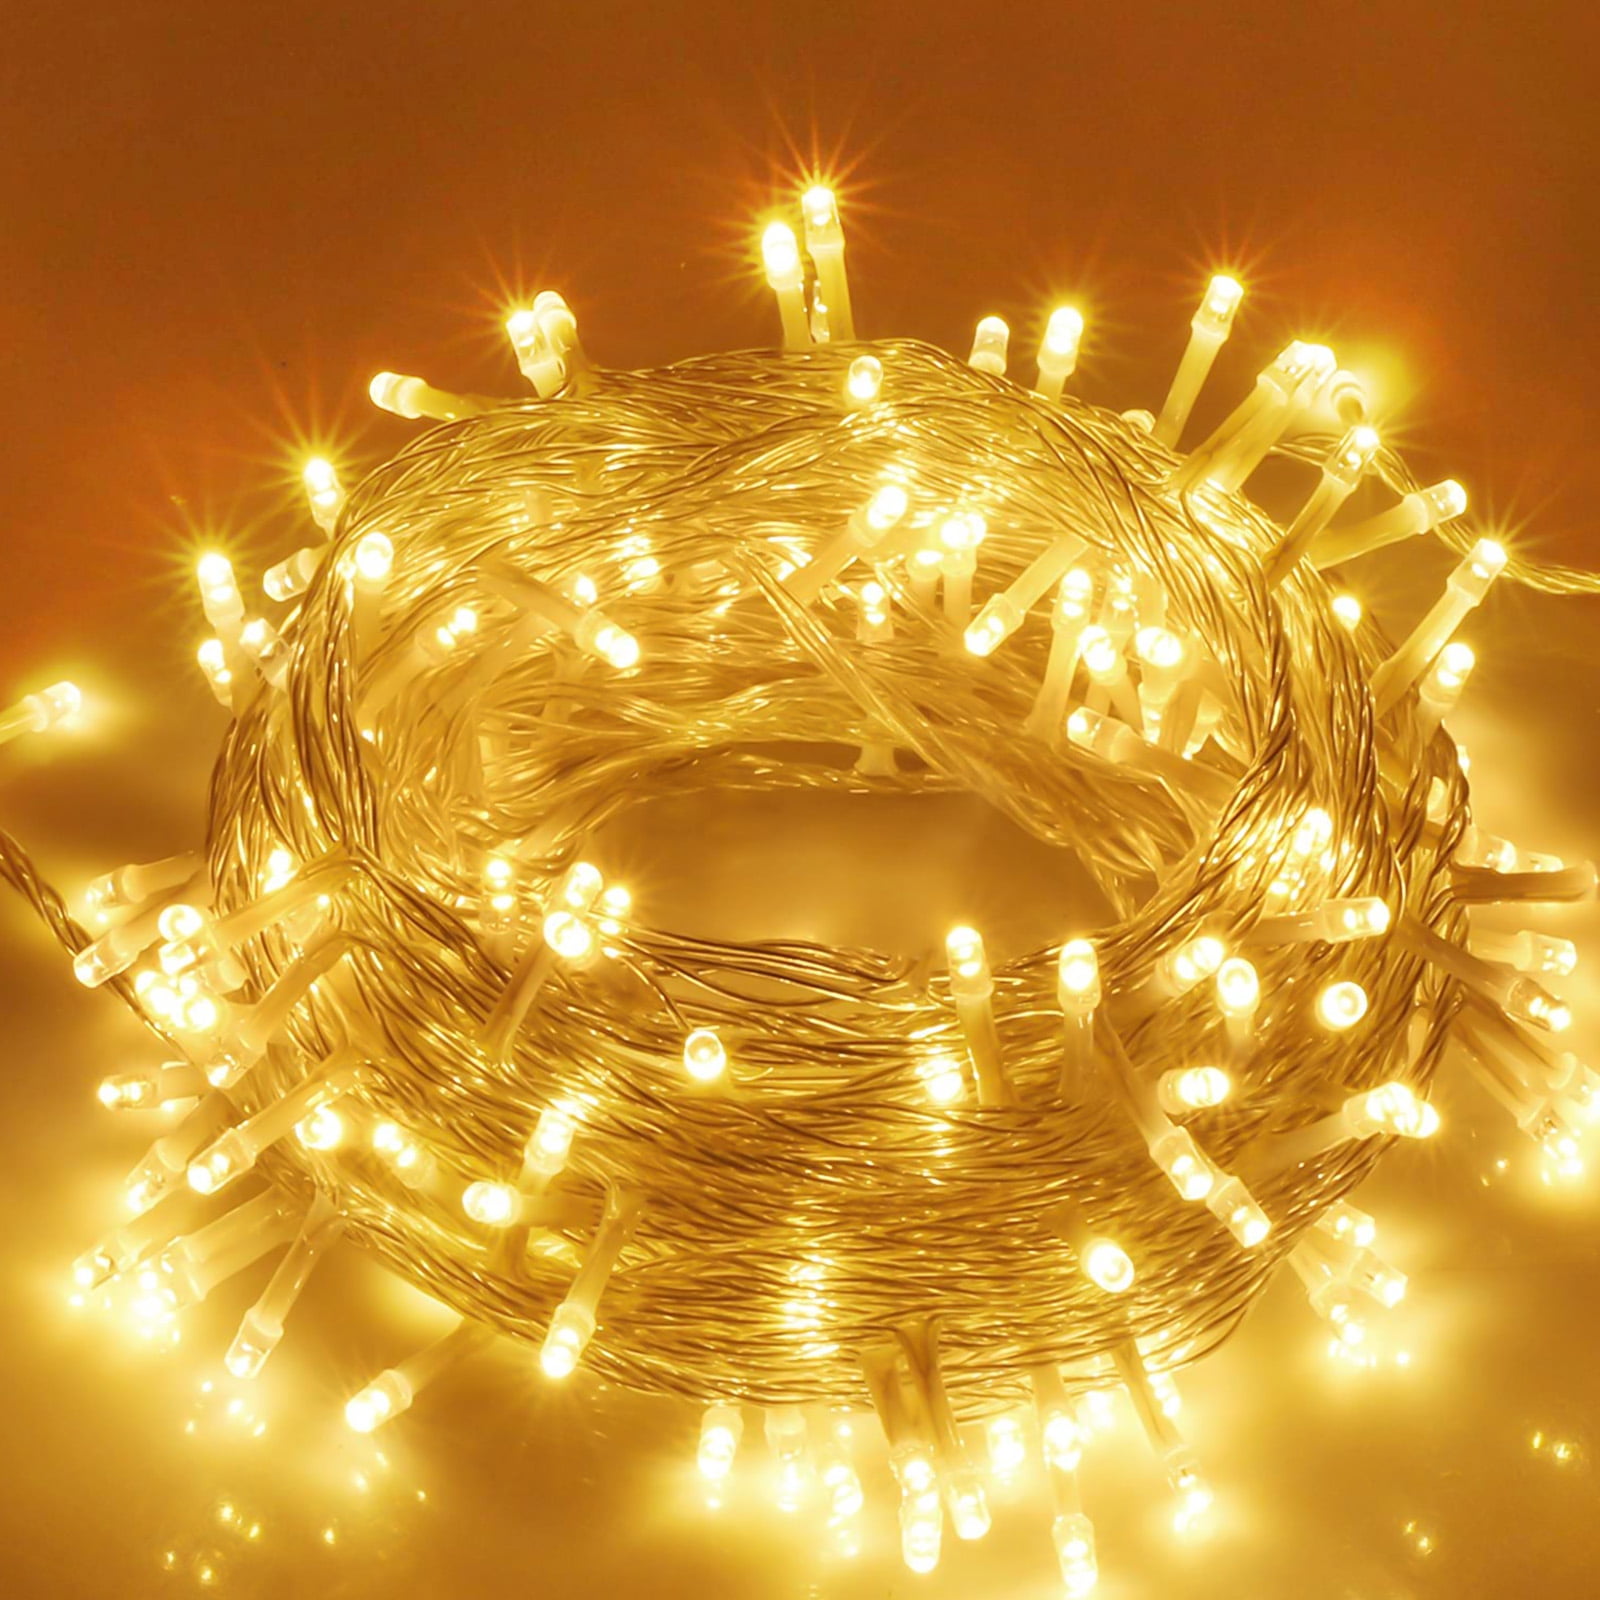 10 20 50 100 LED Wire String Lights Fairy Party Decor Holiday Wedding Supplies 